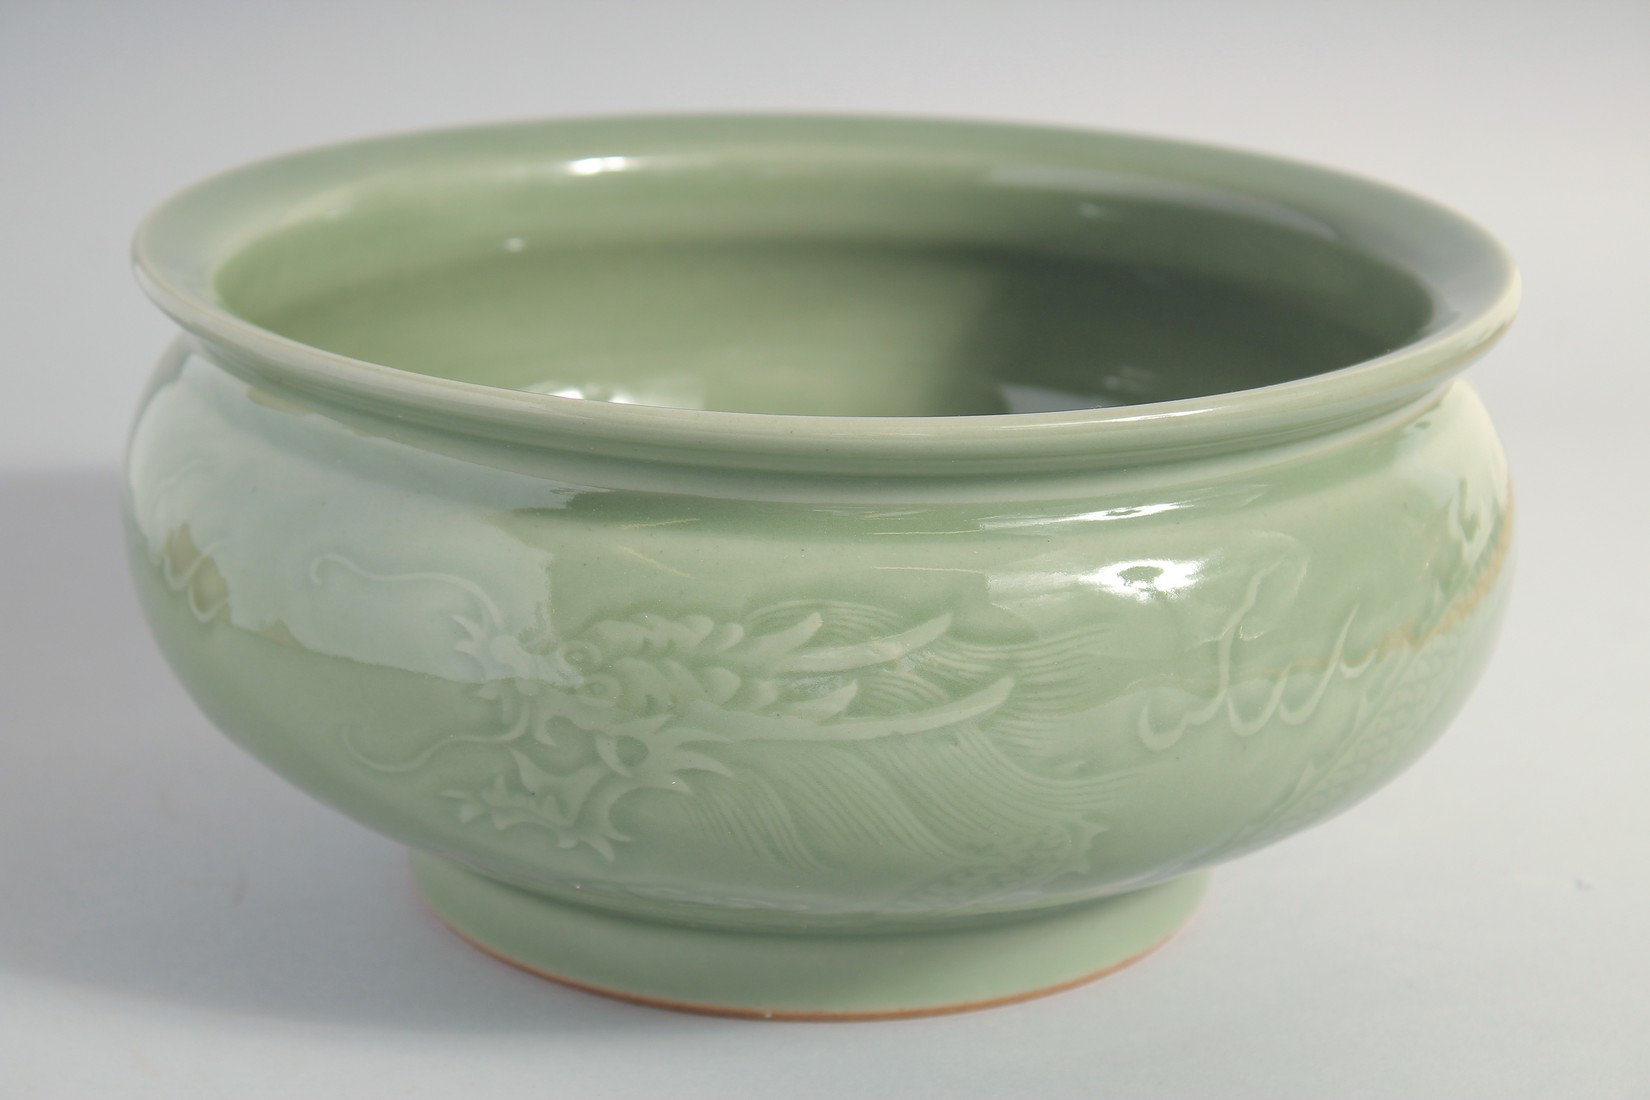 A LARGE CHINESE CELADON GLAZE BOWL, carved with dragon and the flaming pearl of wisdom, 25.5cm - Image 4 of 5